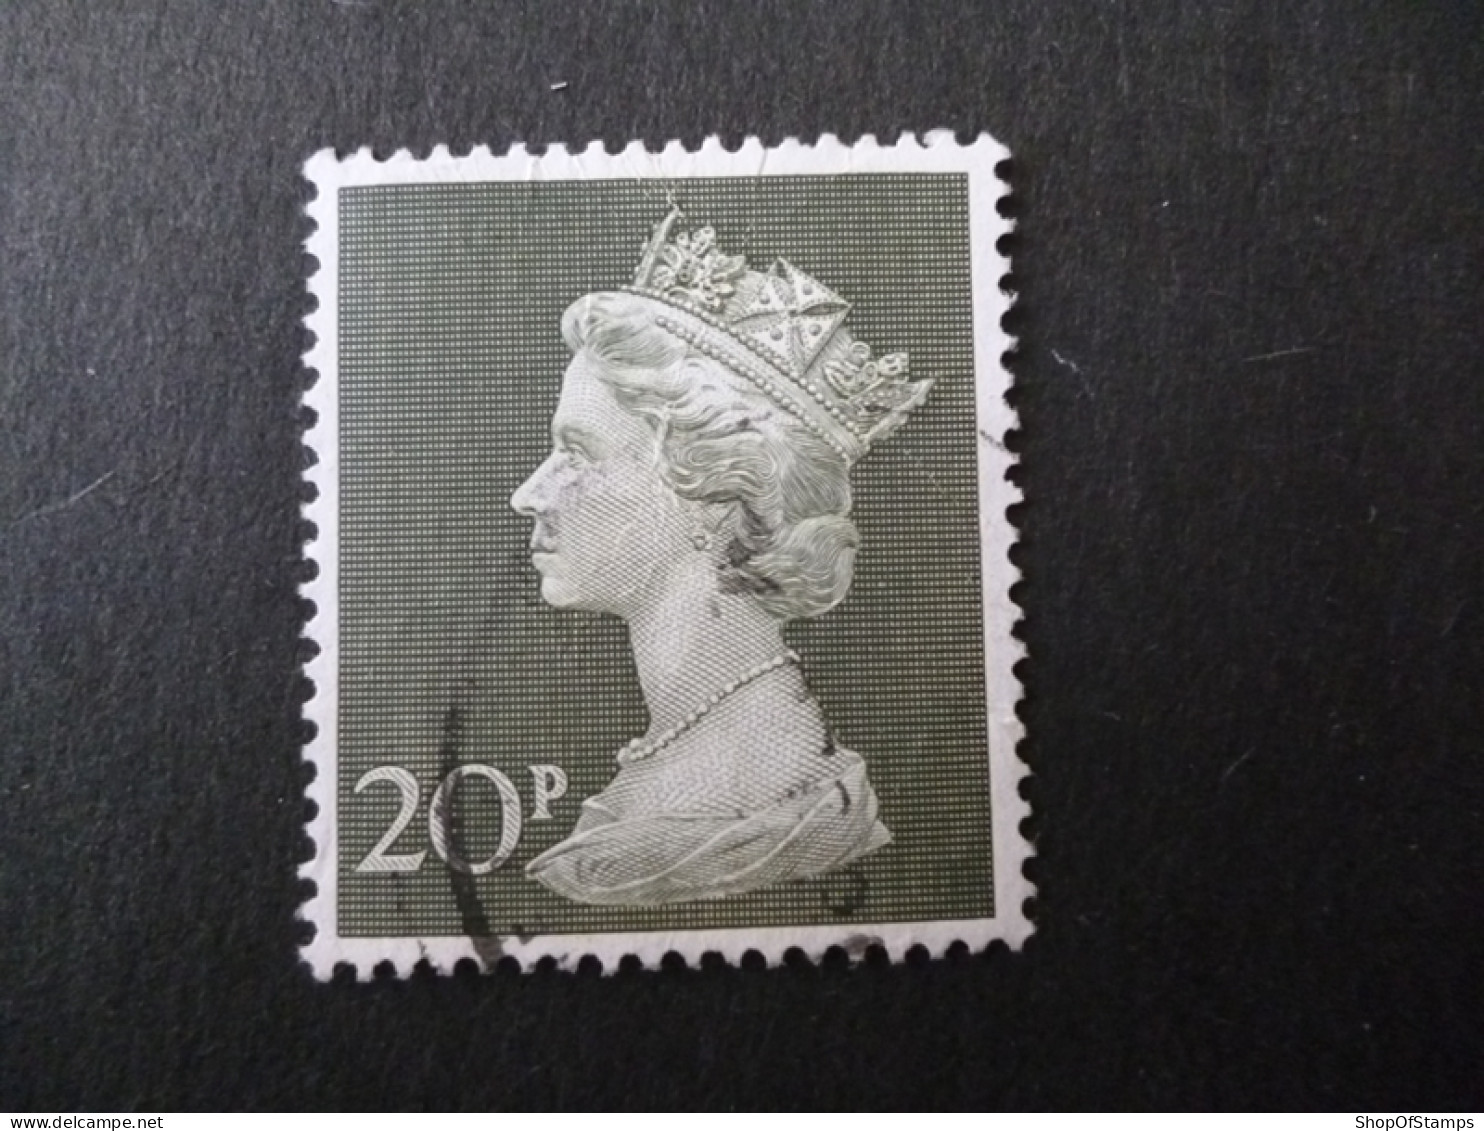 GREAT BRITAIN SG 730 3 USED STAMPS - Franking Machines (EMA)